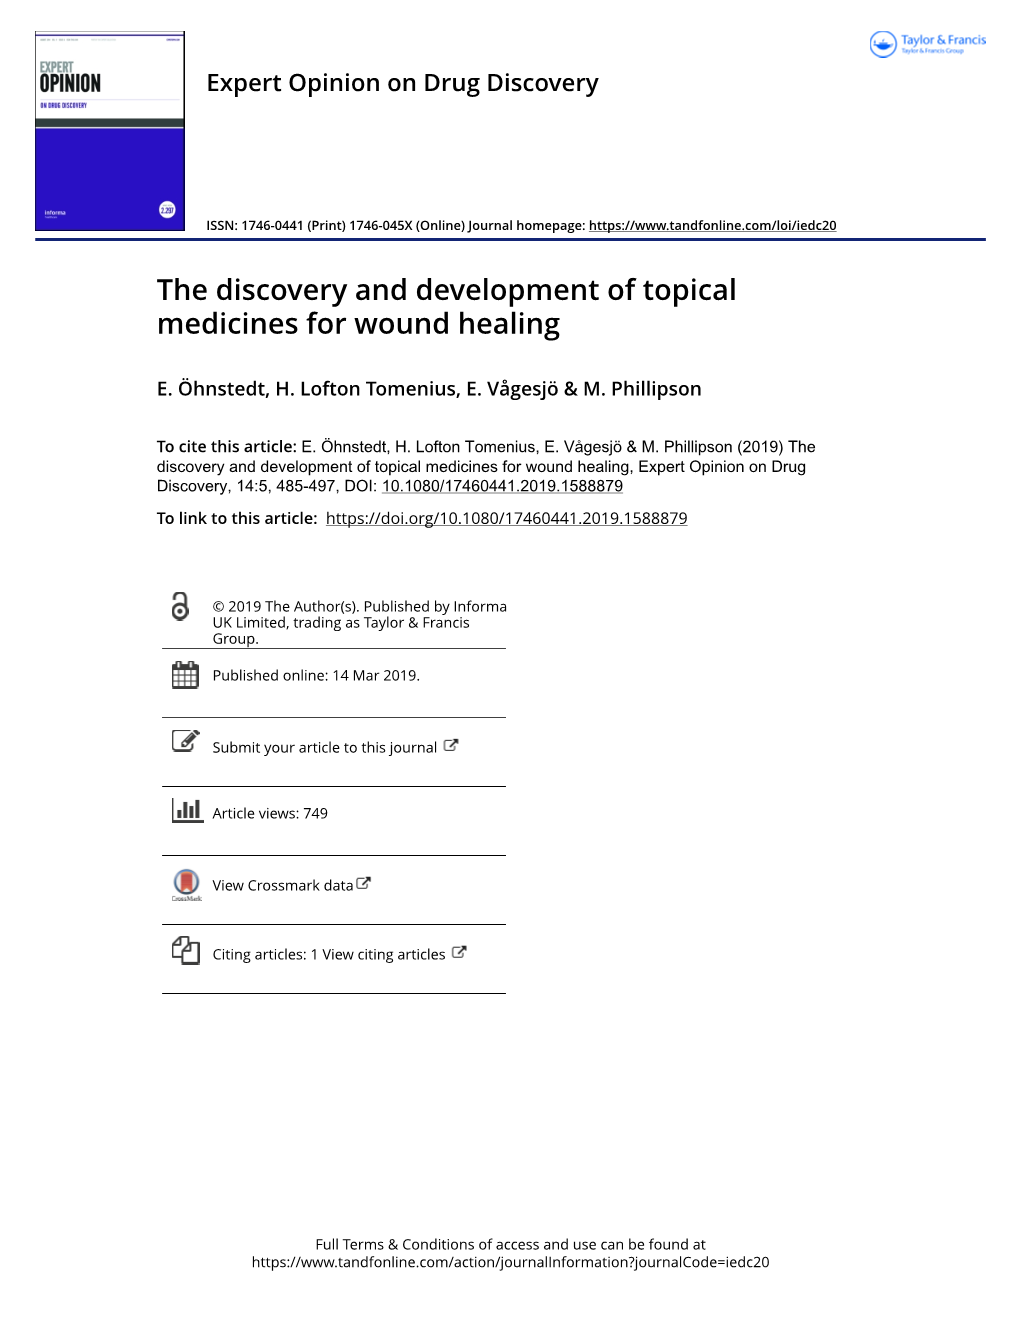 The Discovery and Development of Topical Medicines for Wound Healing